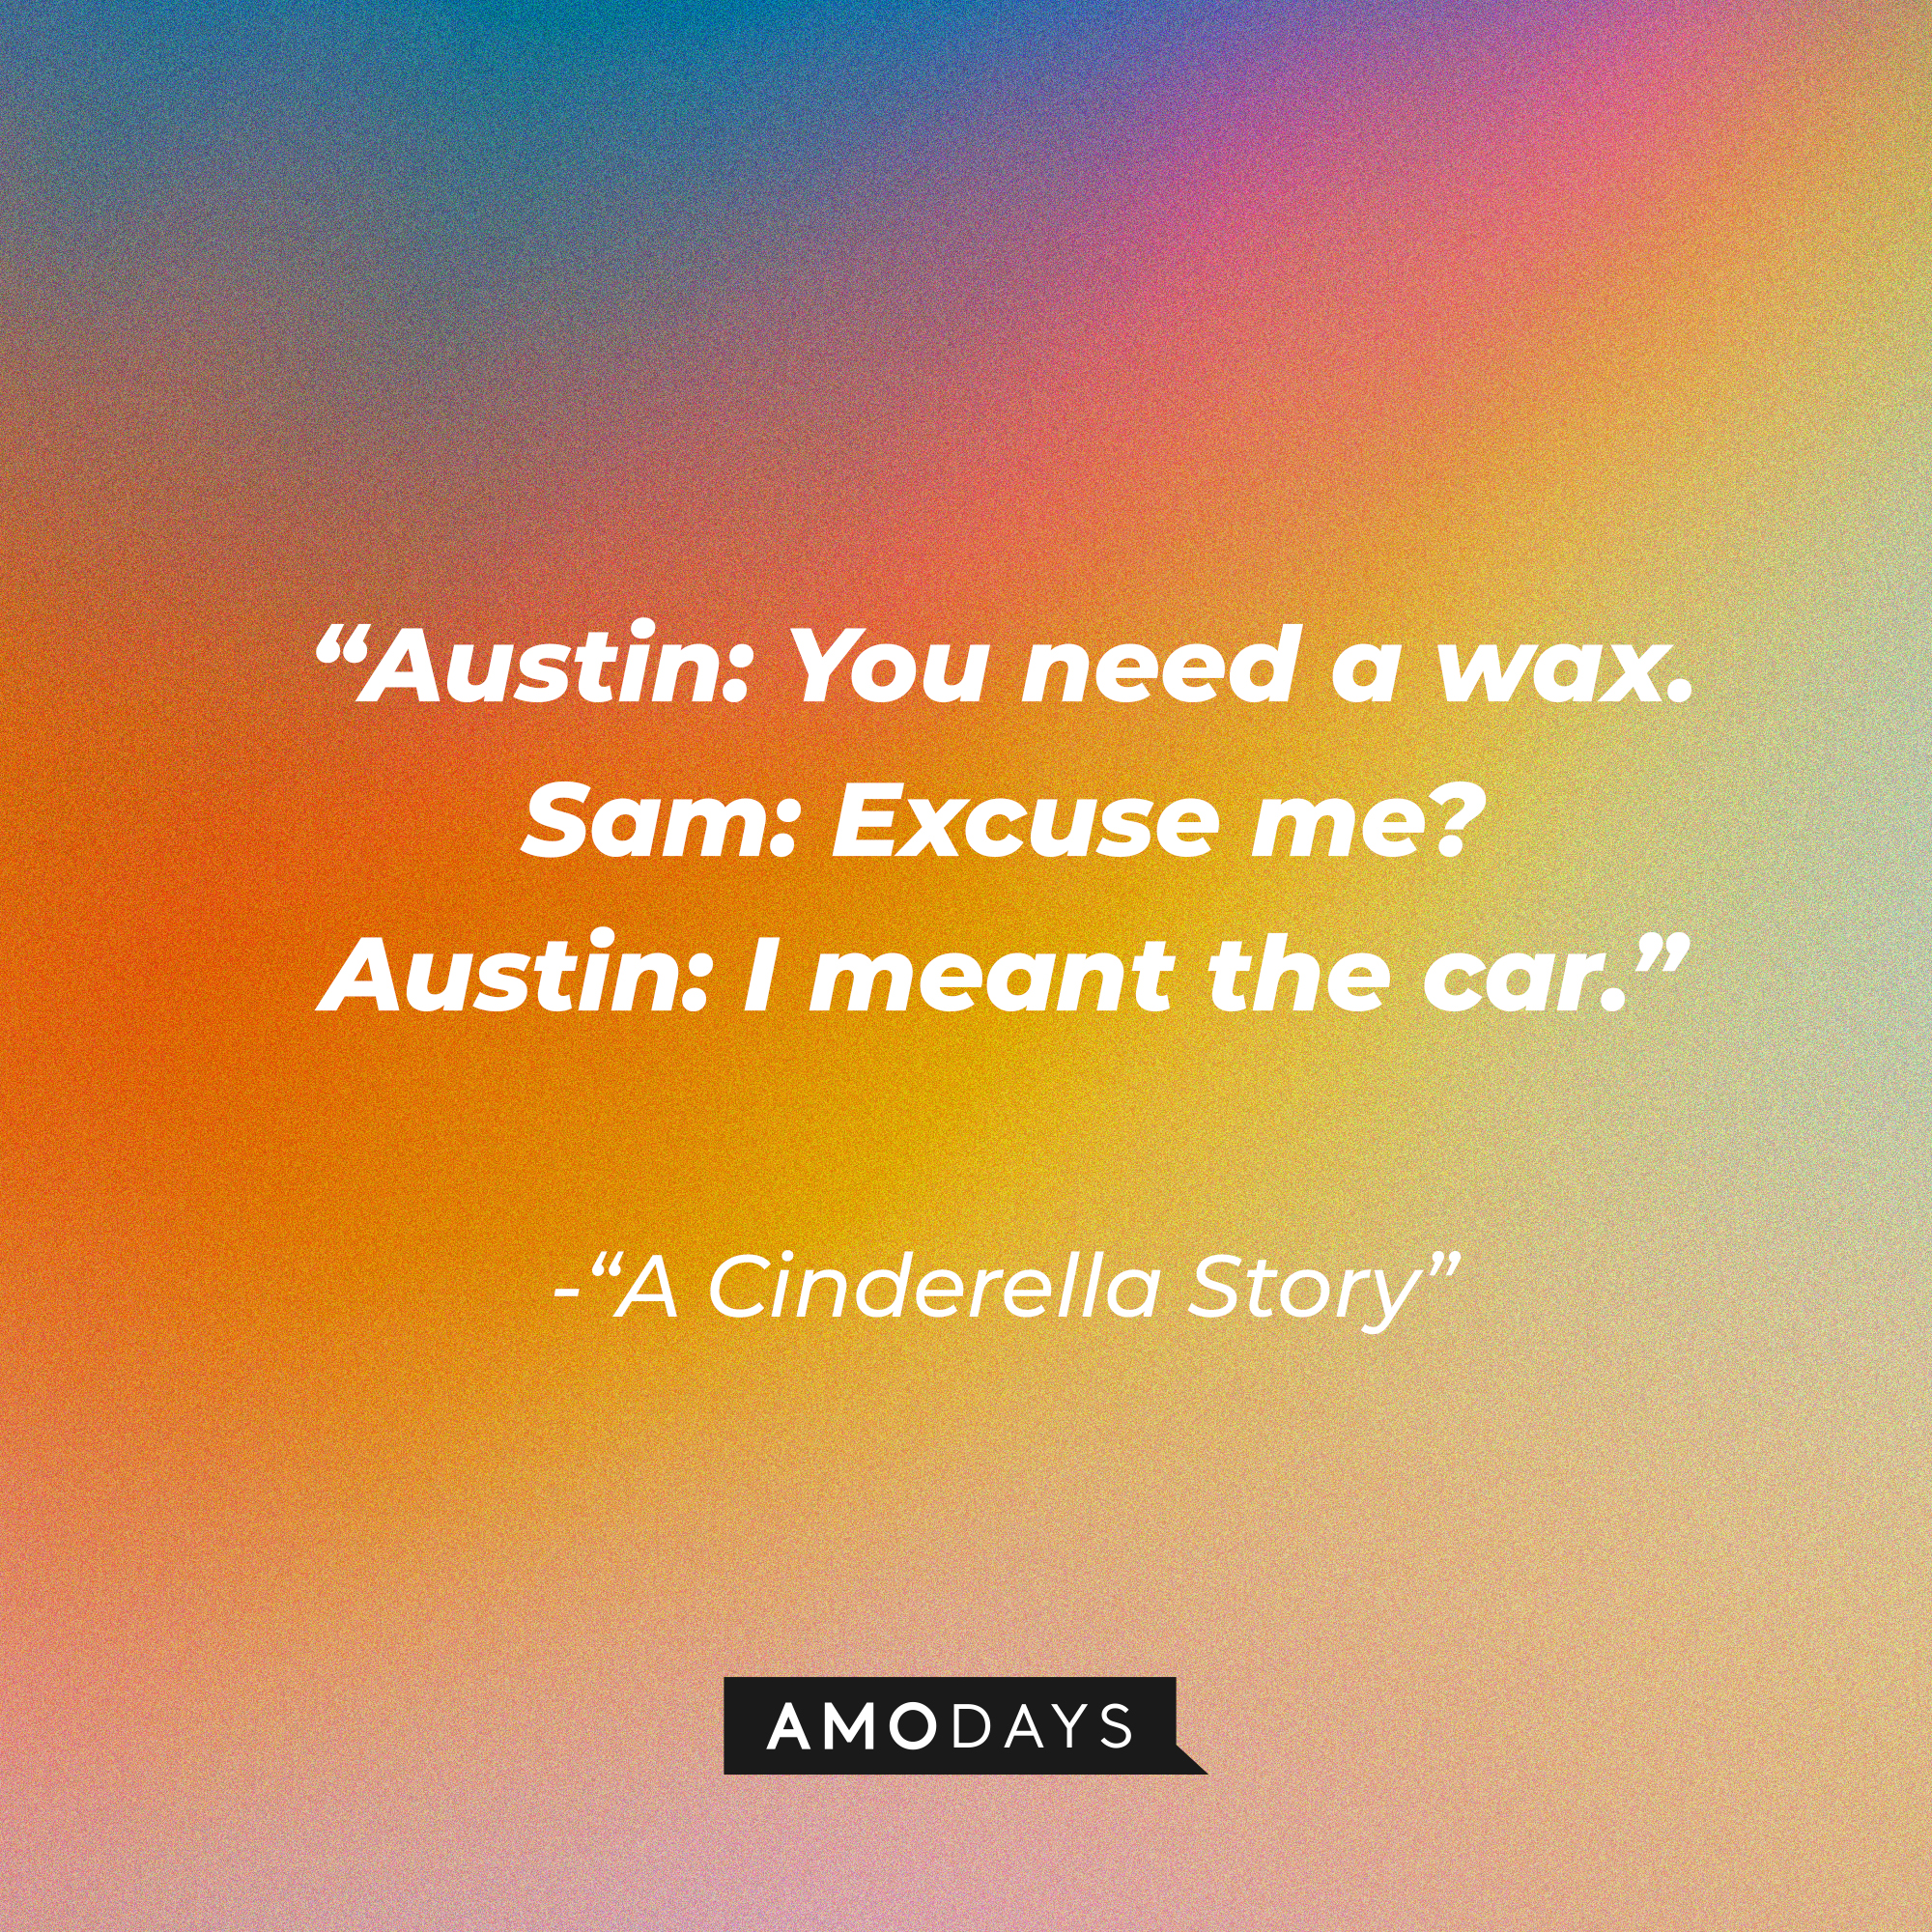 Sam Montgomery's dialogue with Austin Ames from "A Cinderella Story:" "Austin: You need a wax. ' Sam: Excuse me? ; Austin: I meant the car." | Source: Youtube.com/warnerbrosentertainment